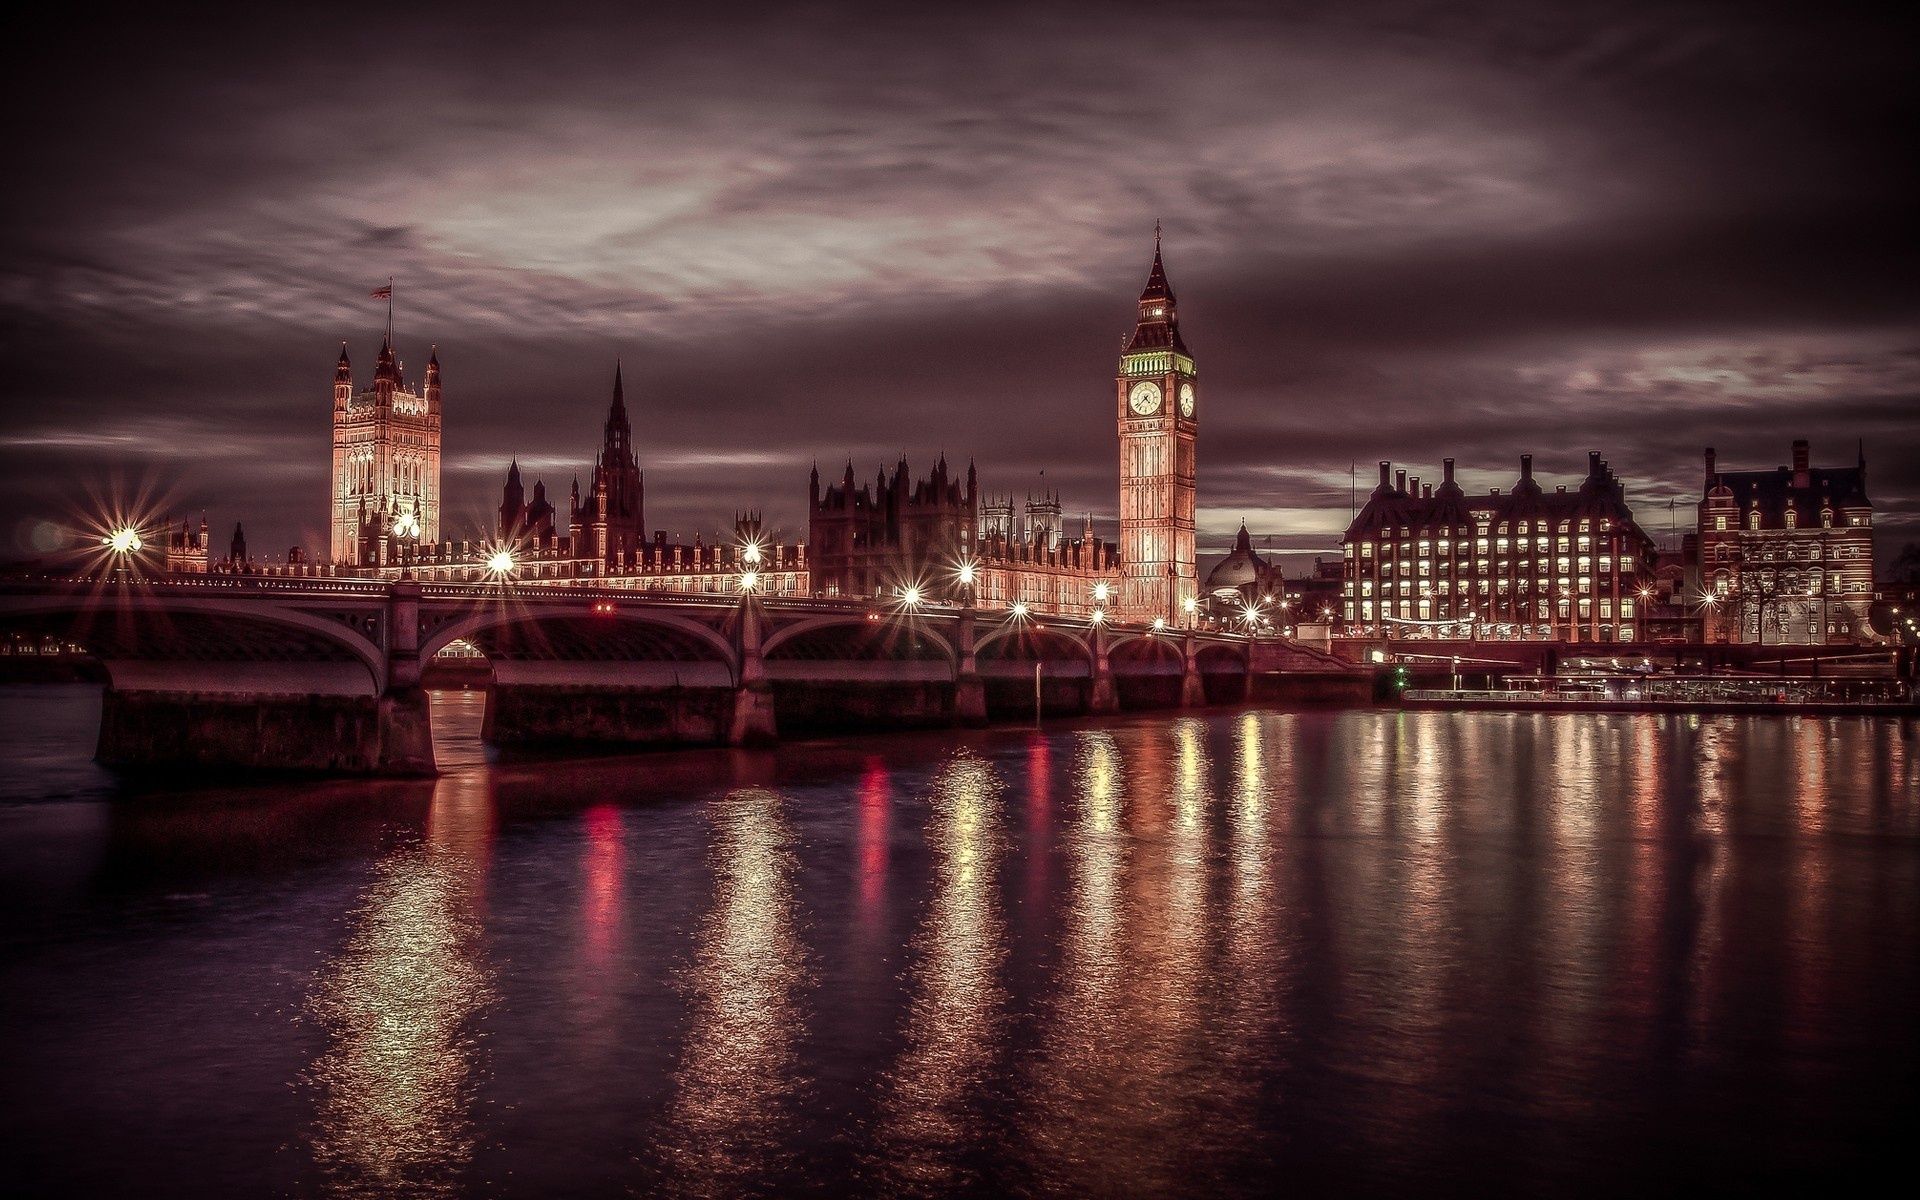 Wallpaper. Cities. photo. picture. london, england, night, city